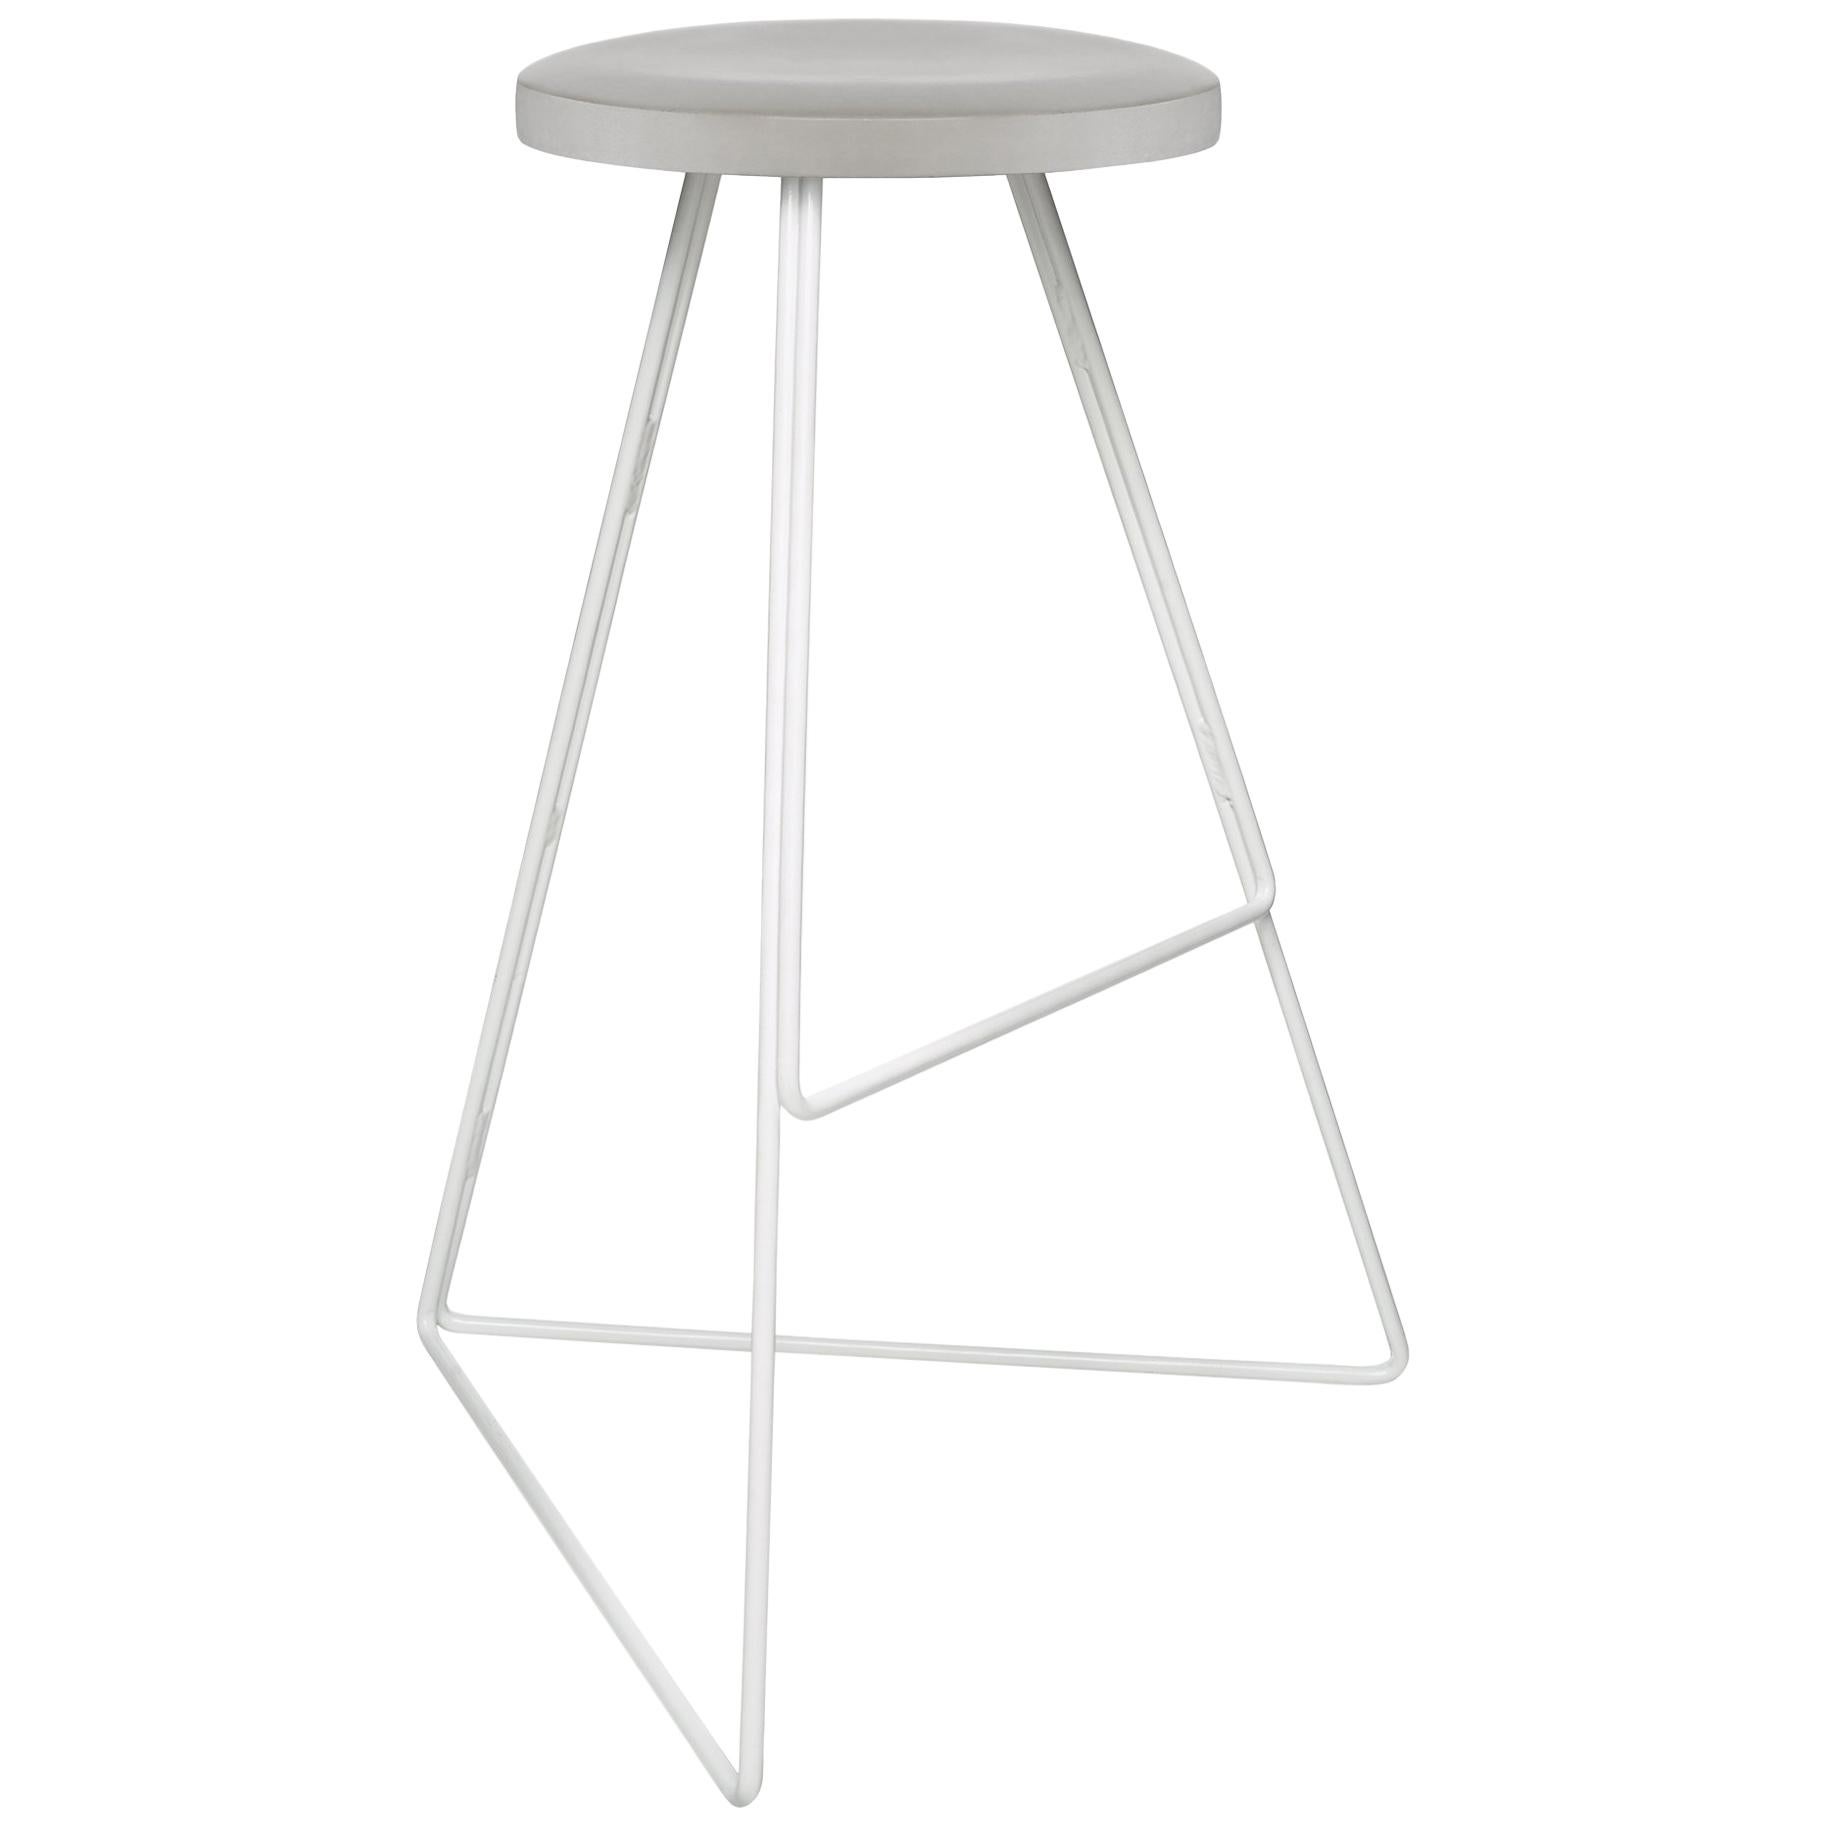 Coleman Stool, White and Ecru, Counter Height For Sale